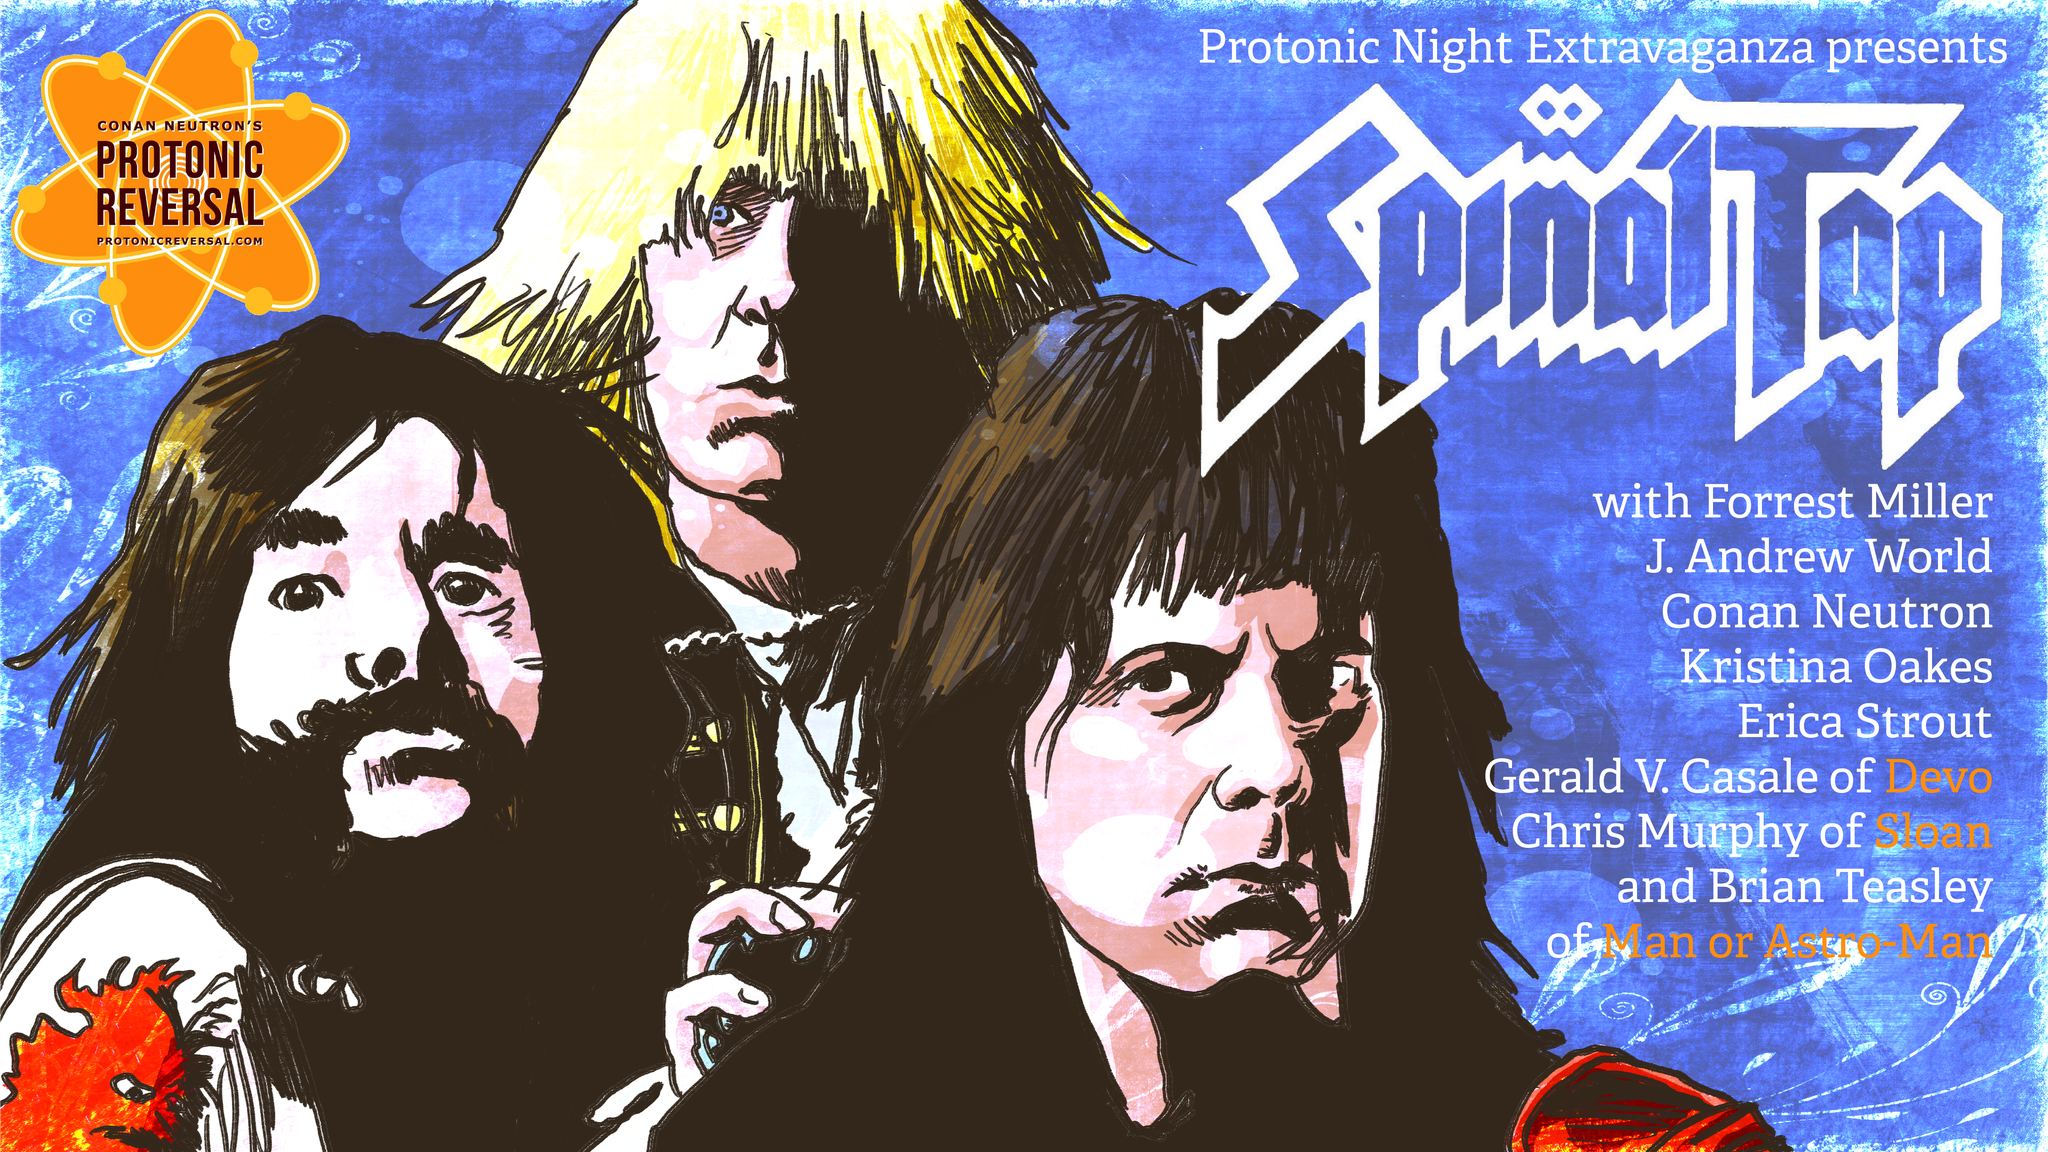 Ep291: THIS IS SPINAL TAP (Gerald V. Casale, Brian Teasley, Chris Murphy) - Movie Night Extravaganza crossover